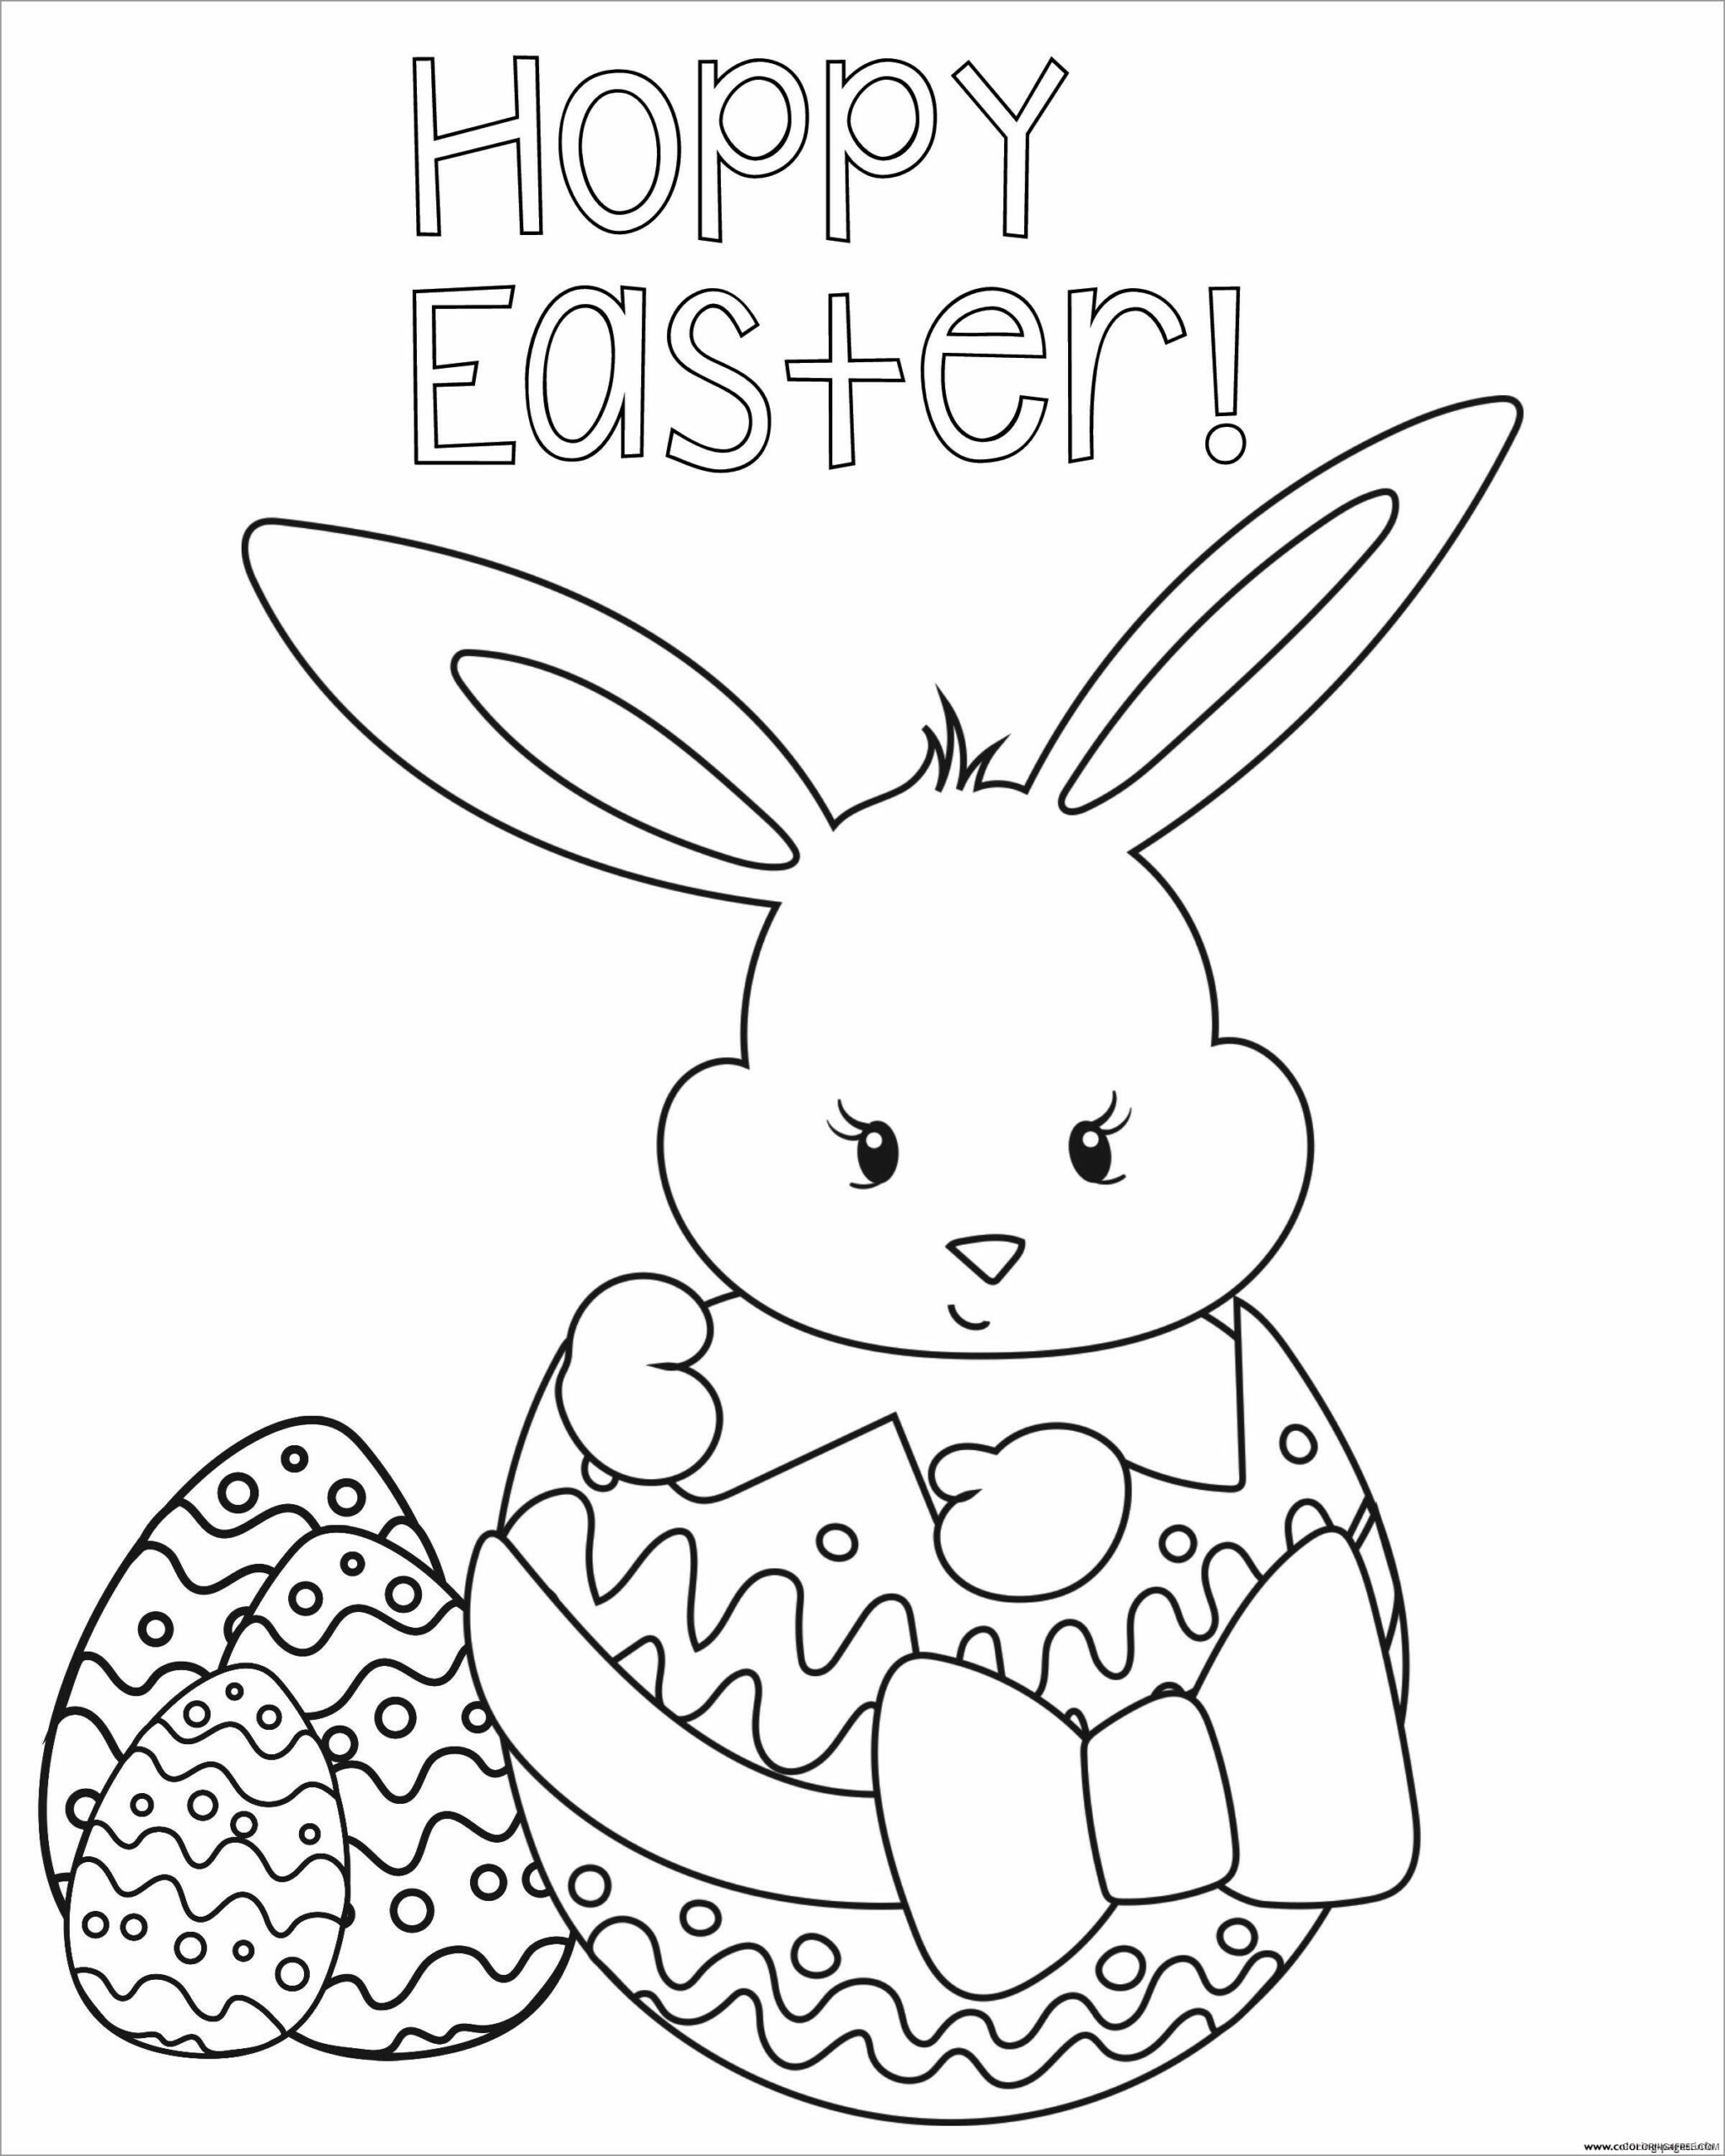 Rabbit Coloring Pages Animal Printable Sheets happy easter egg rabbit 2021 4164 Coloring4free